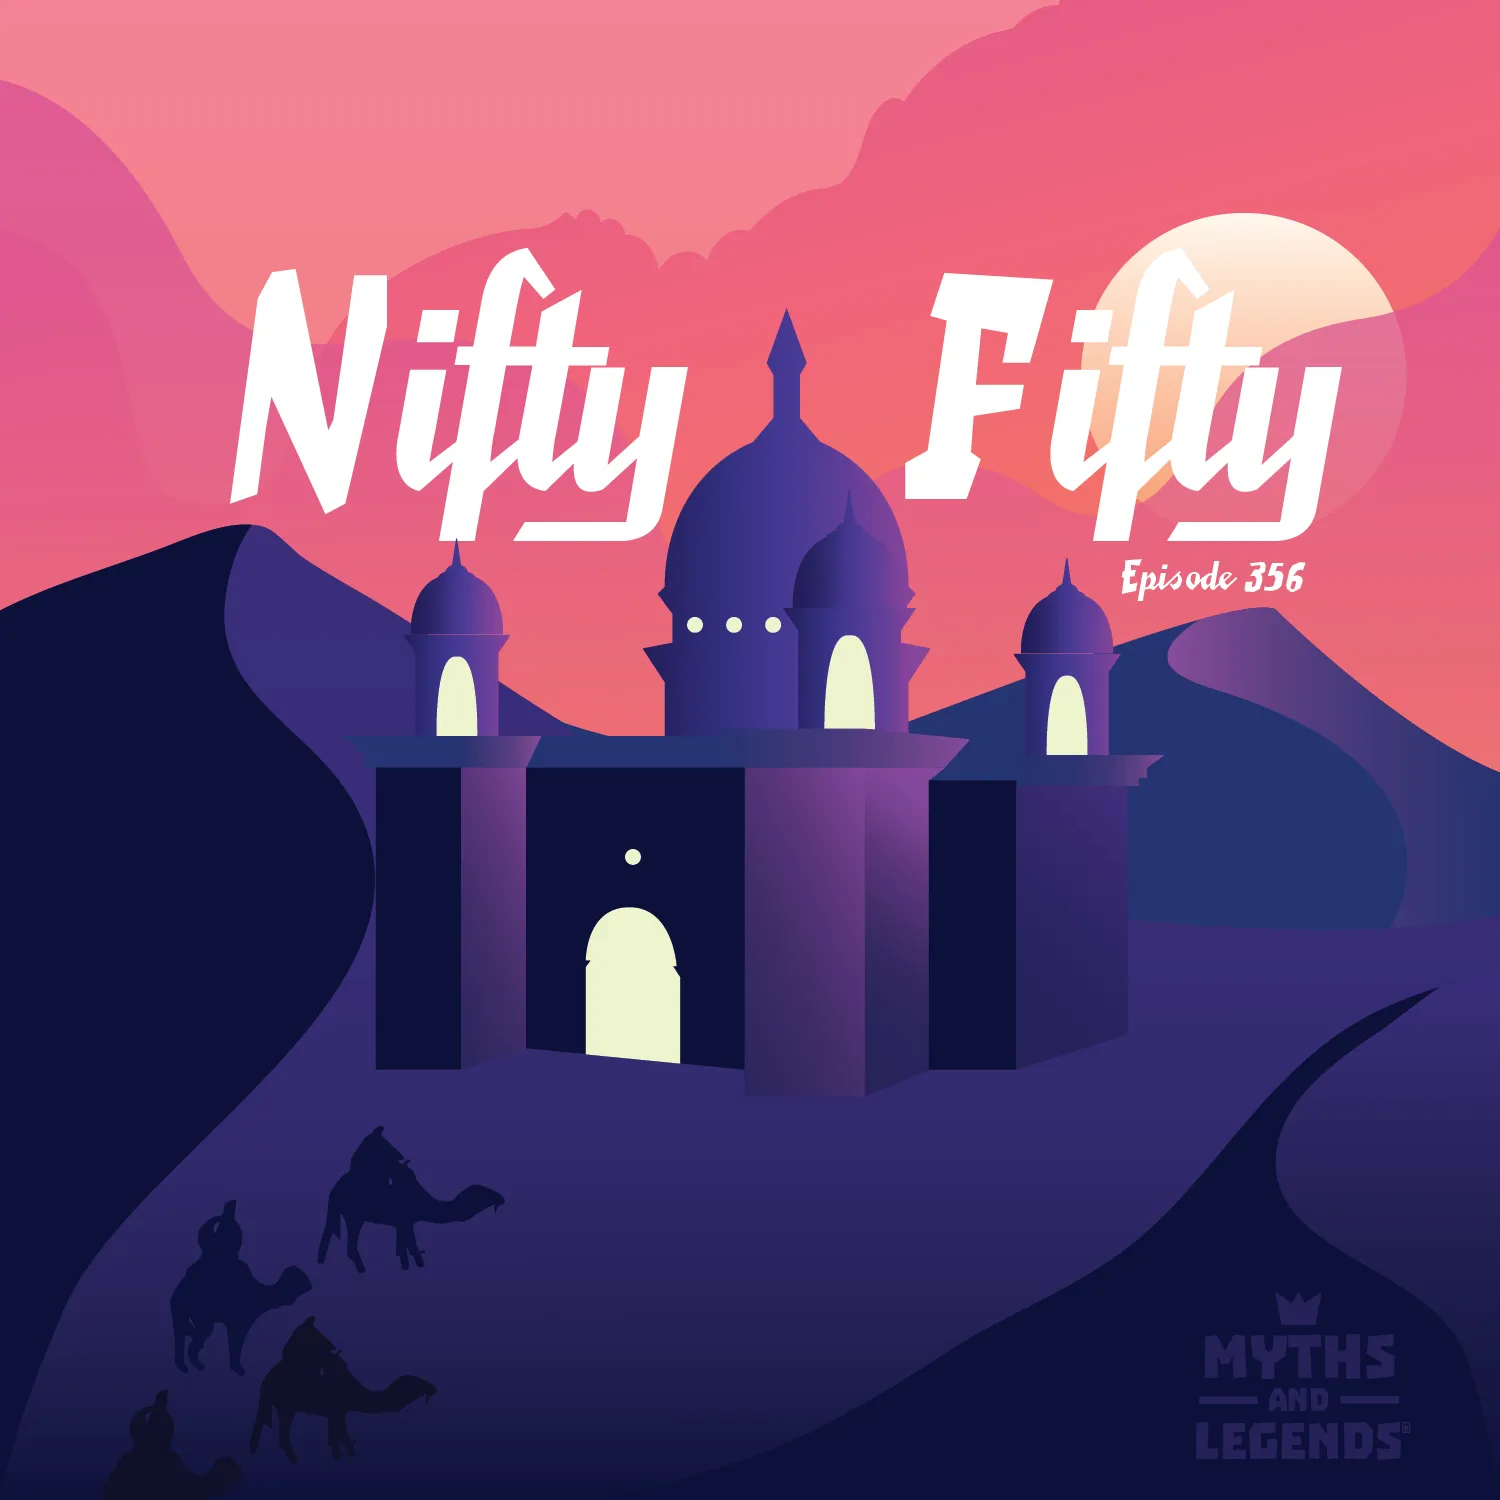 An illustration featuring a stylized graphic of a desert palace with two prominent domes and a central archway against a purple and pink sunset sky. In the foreground, silhouettes of several people riding camels are visible on a winding path leading to the palace. The title 'Nifty Fifty' is displayed in large, white stylized font at the top, with 'Episode 356' underneath. The logo 'MYTHS AND LEGENDS' is situated in the bottom right corner.